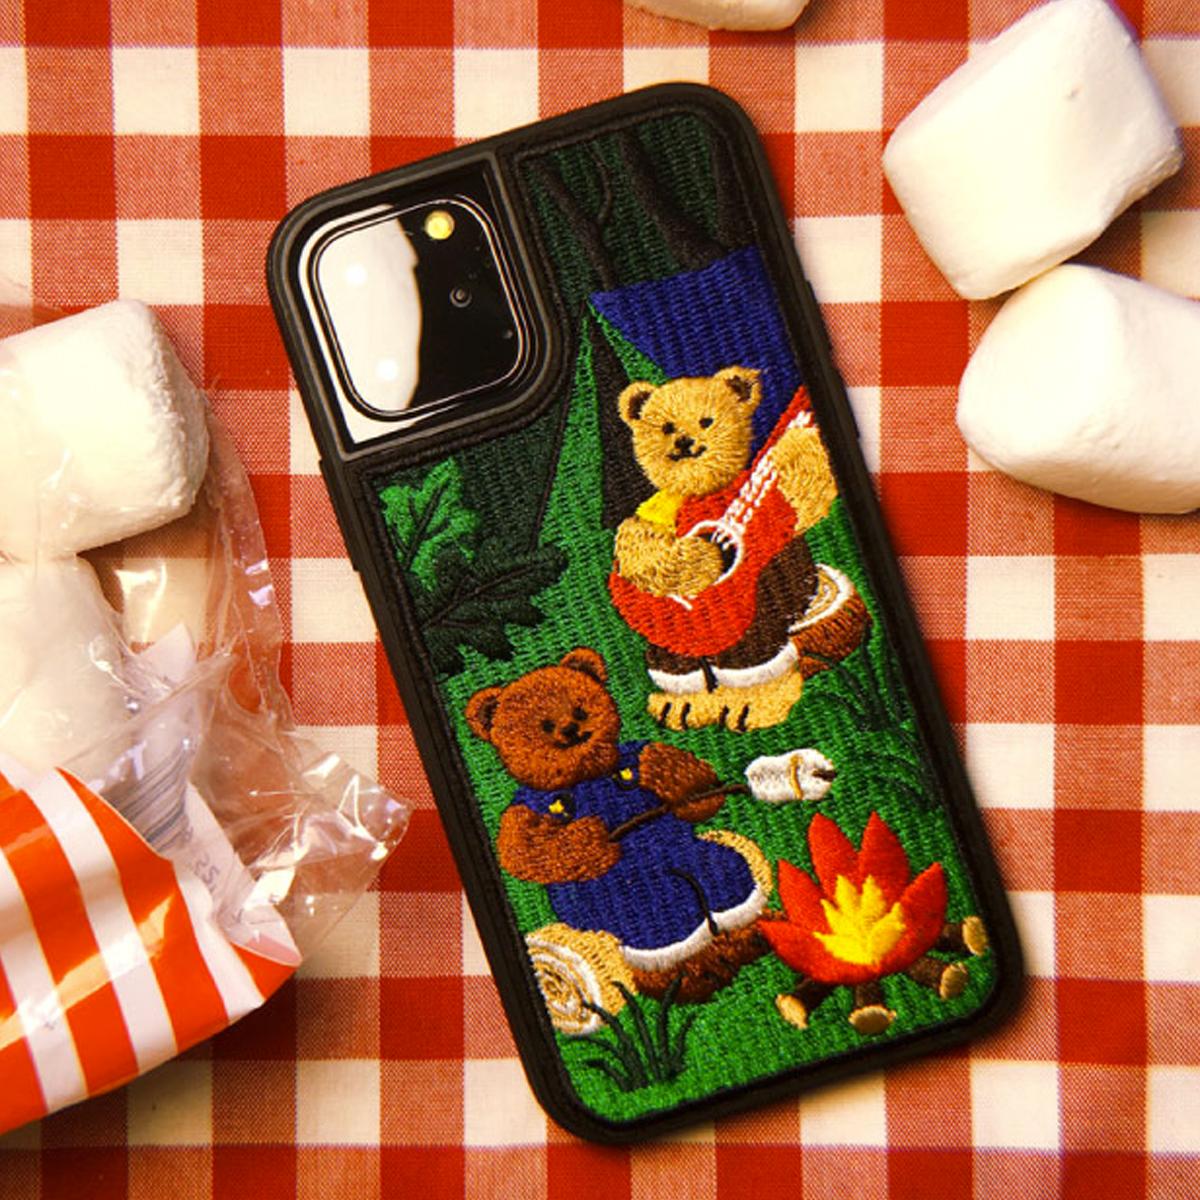 iPhone Embroidery Case Season 3 (Camping)